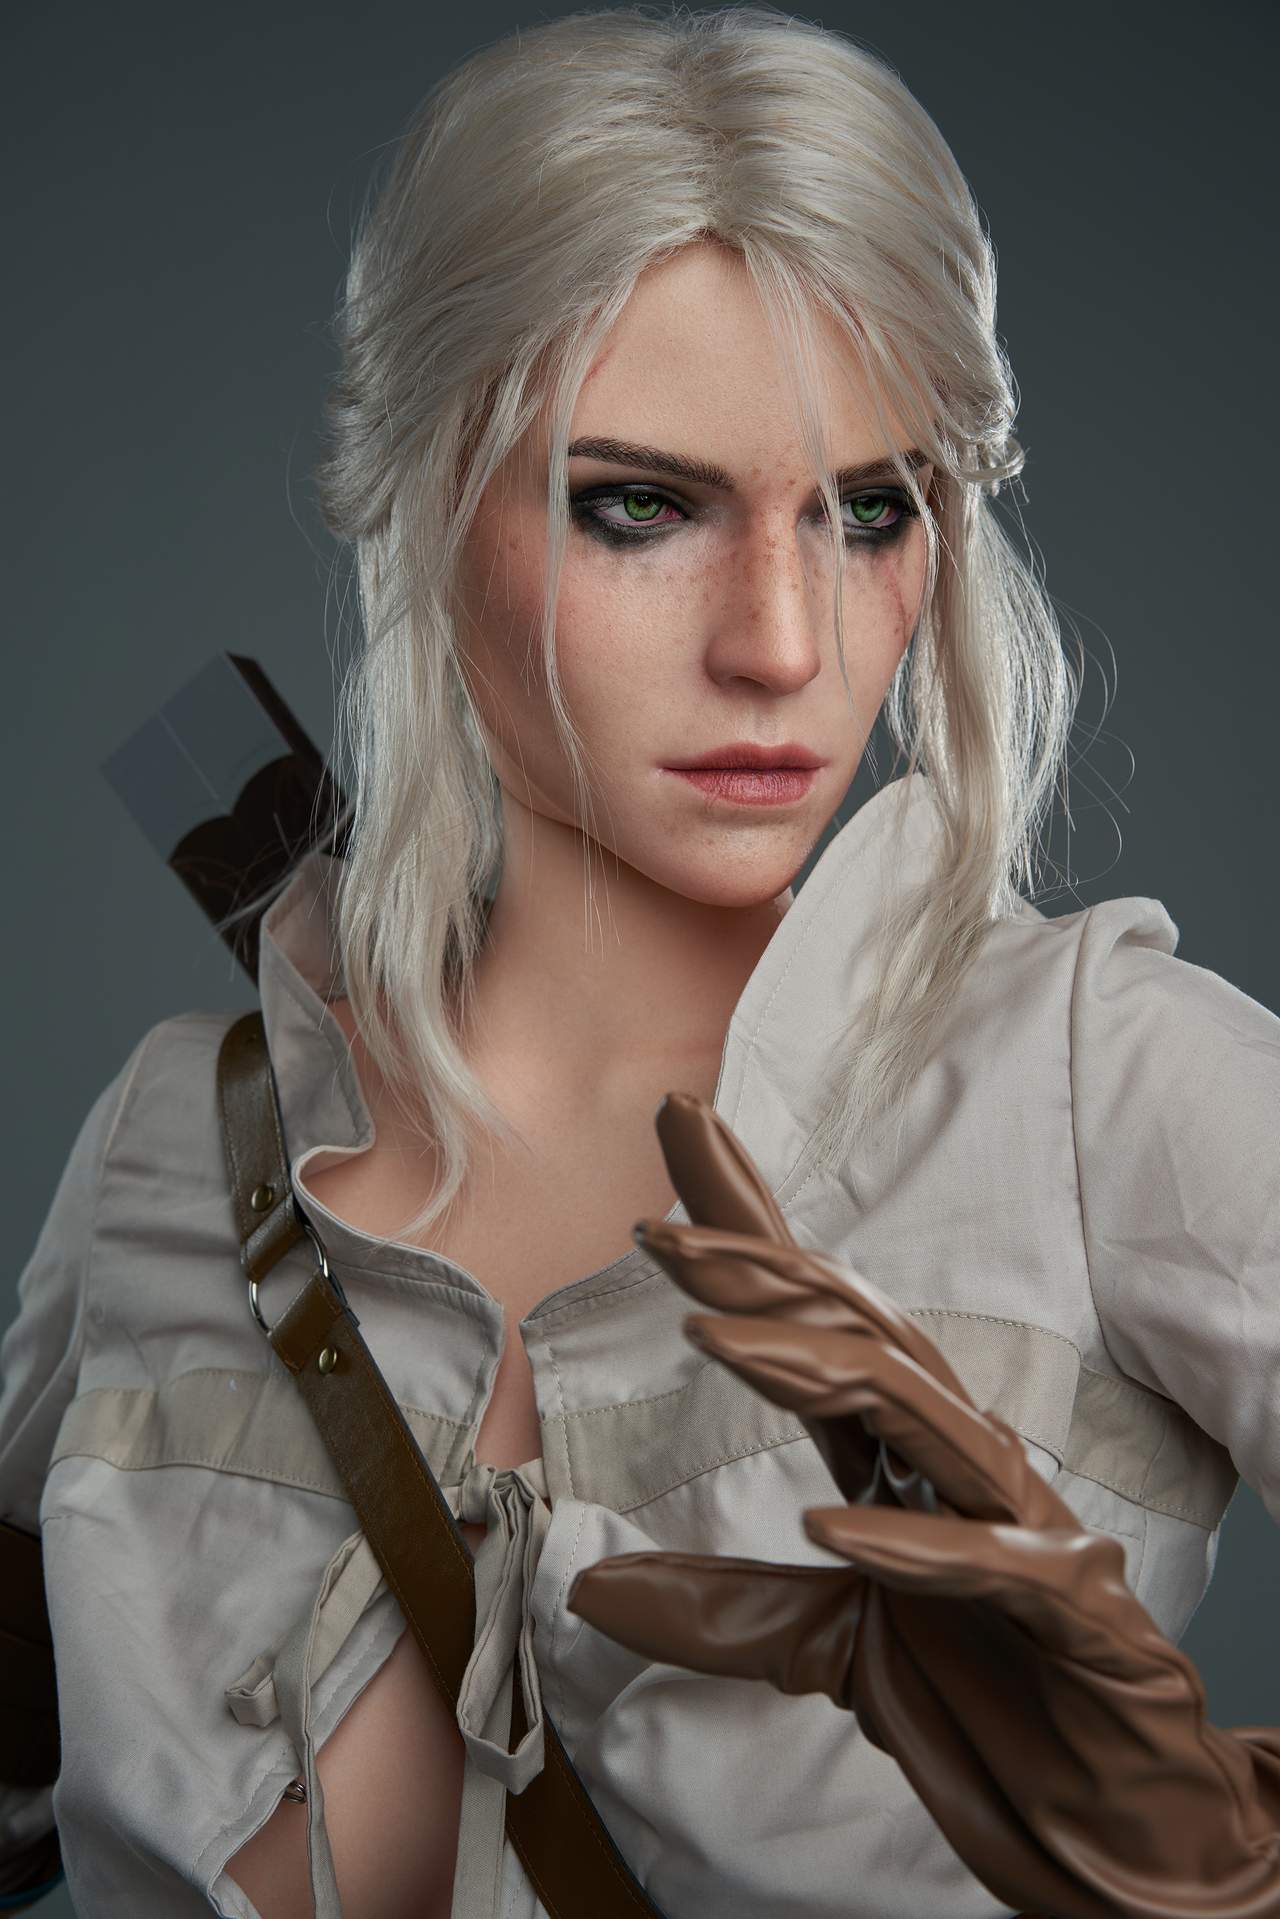 Gamelady's Realistic Ciri Sex Doll: Inspired by The Witcher Anmodolls GameLady